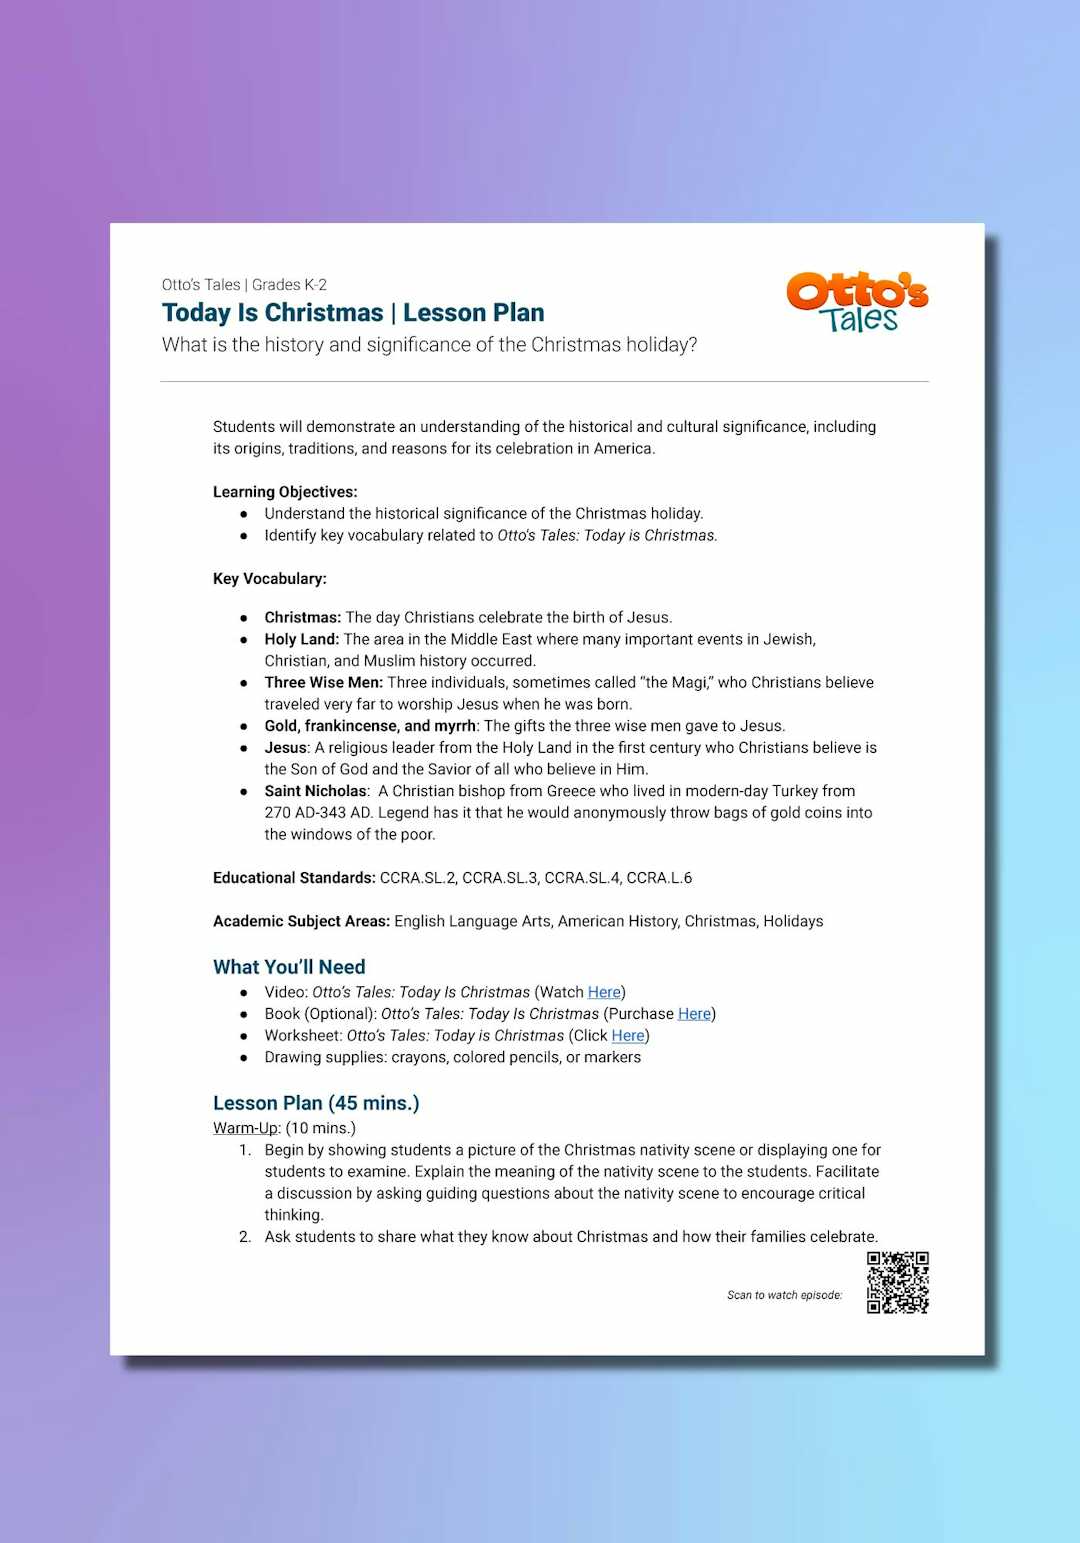 "Otto's Tales: Today is Christmas" Lesson Plan